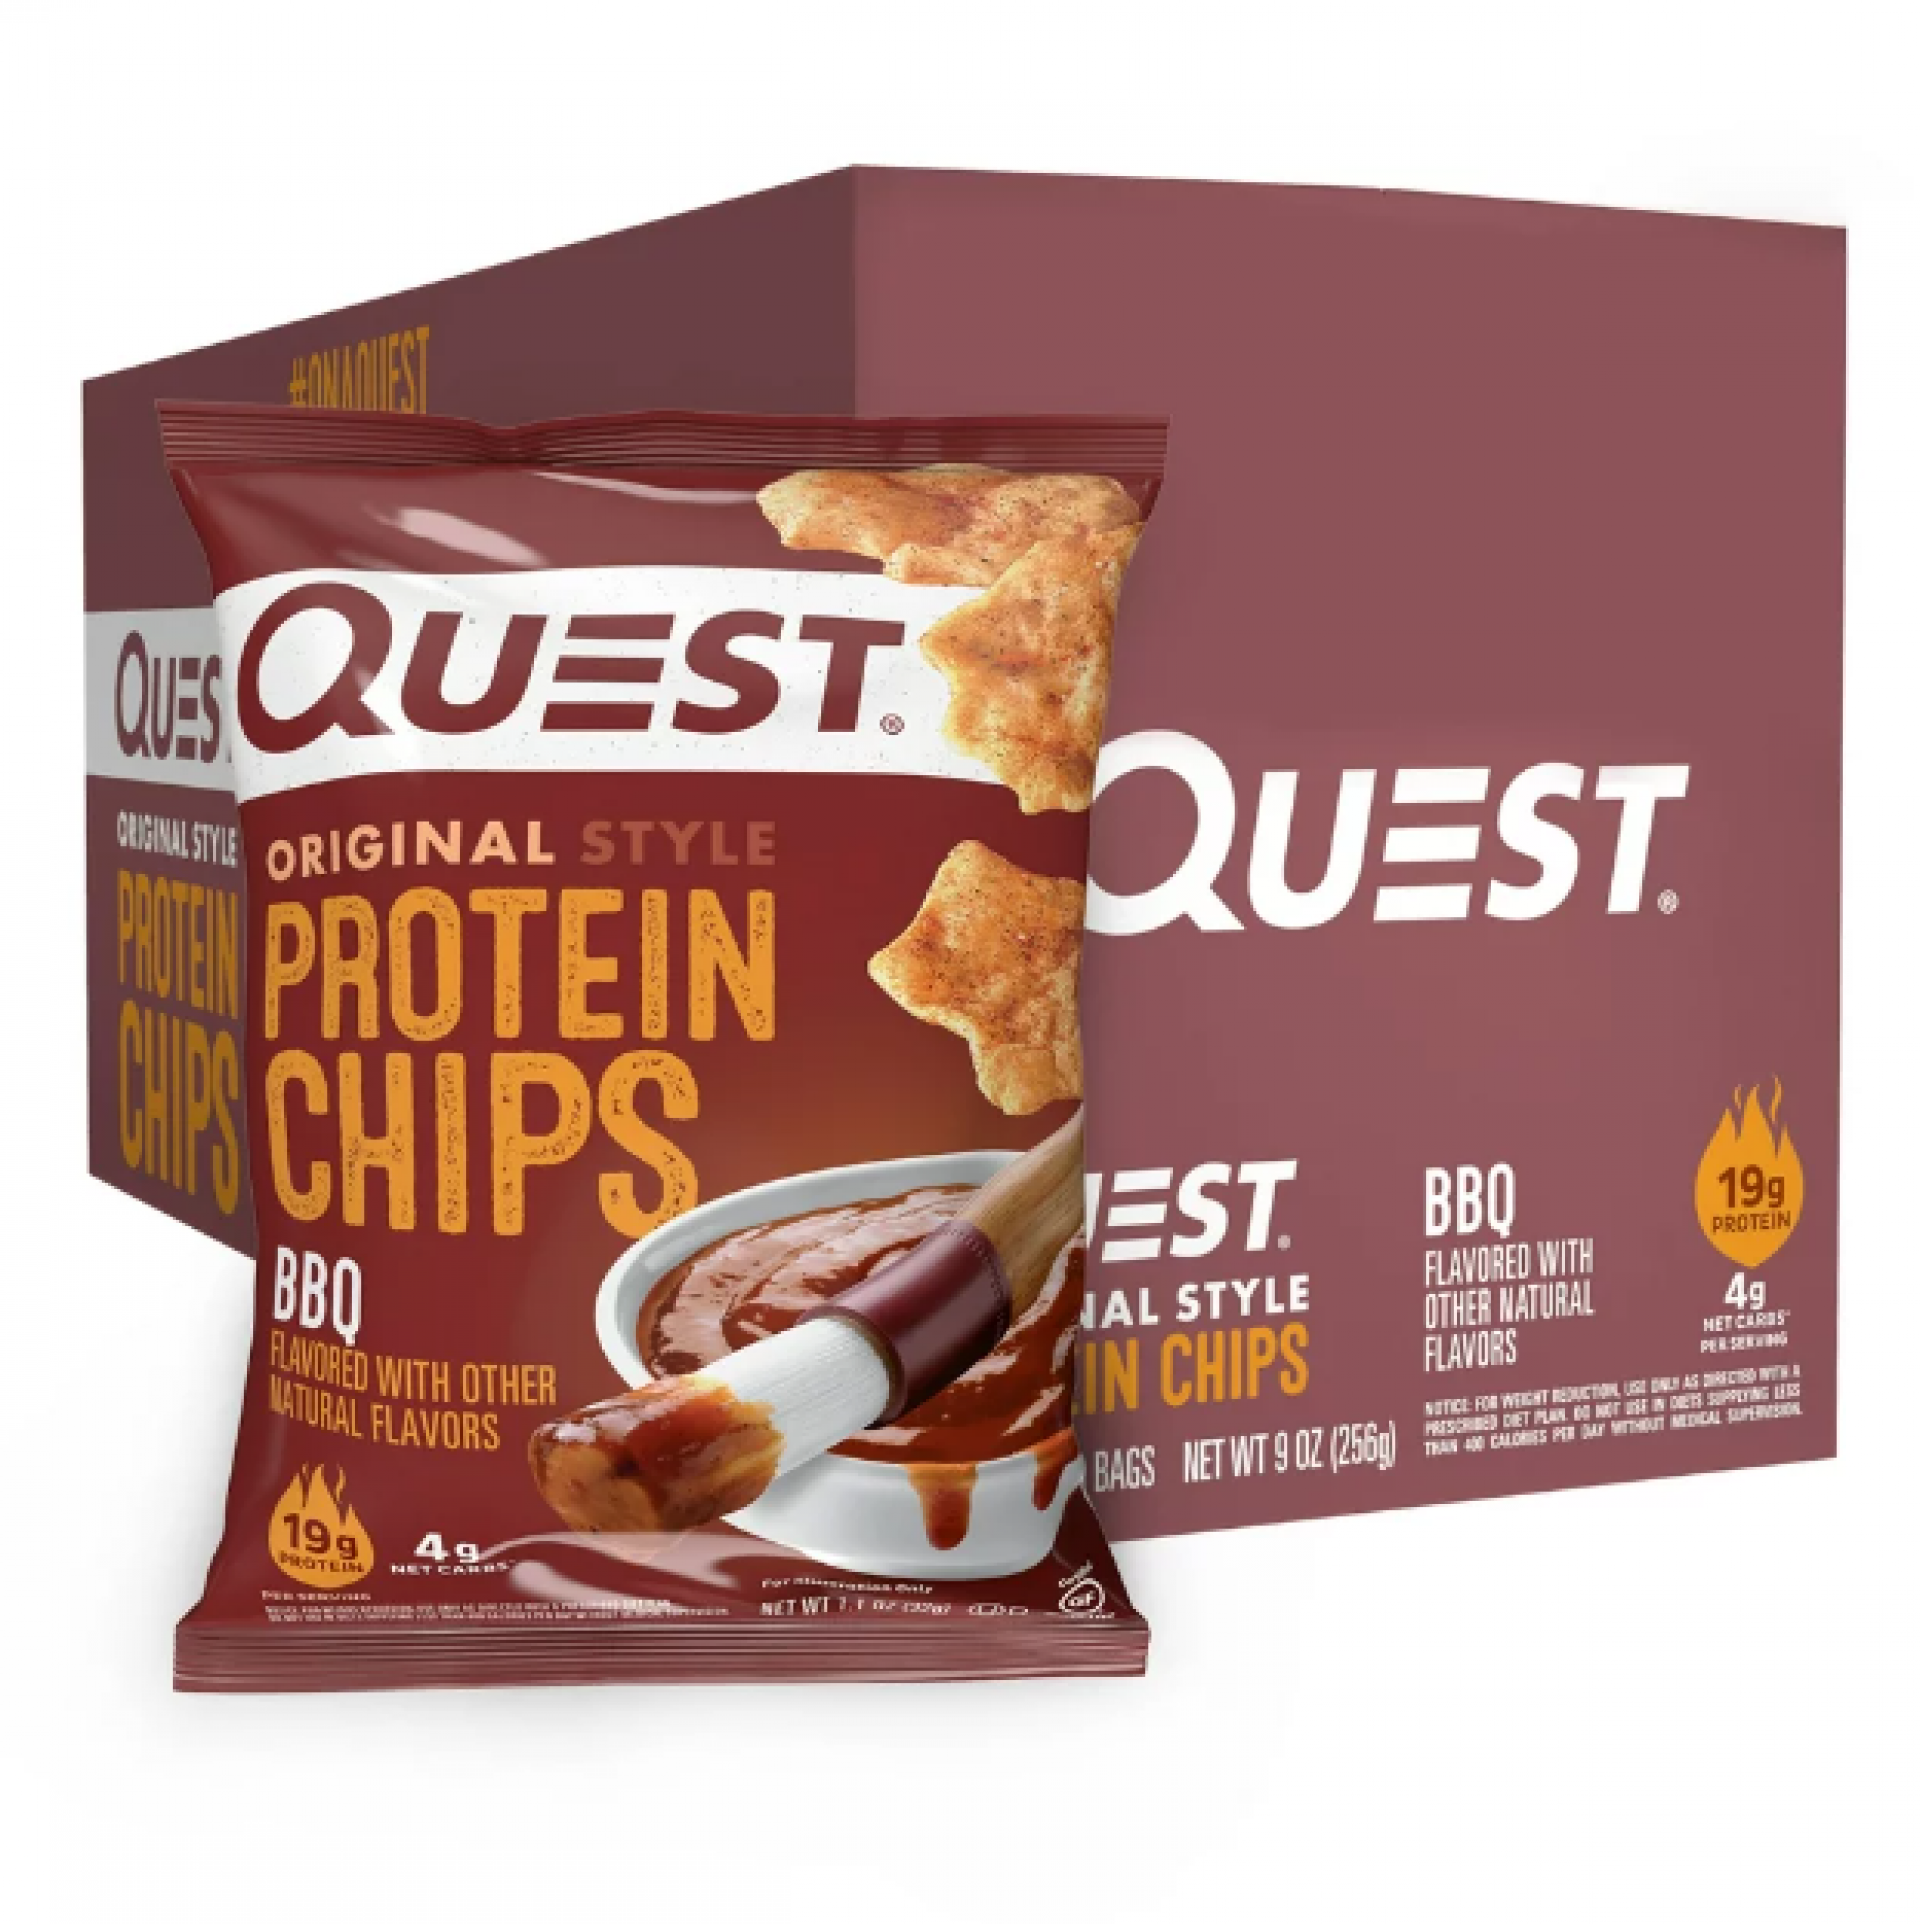 Quest Protein Chips - $4.49